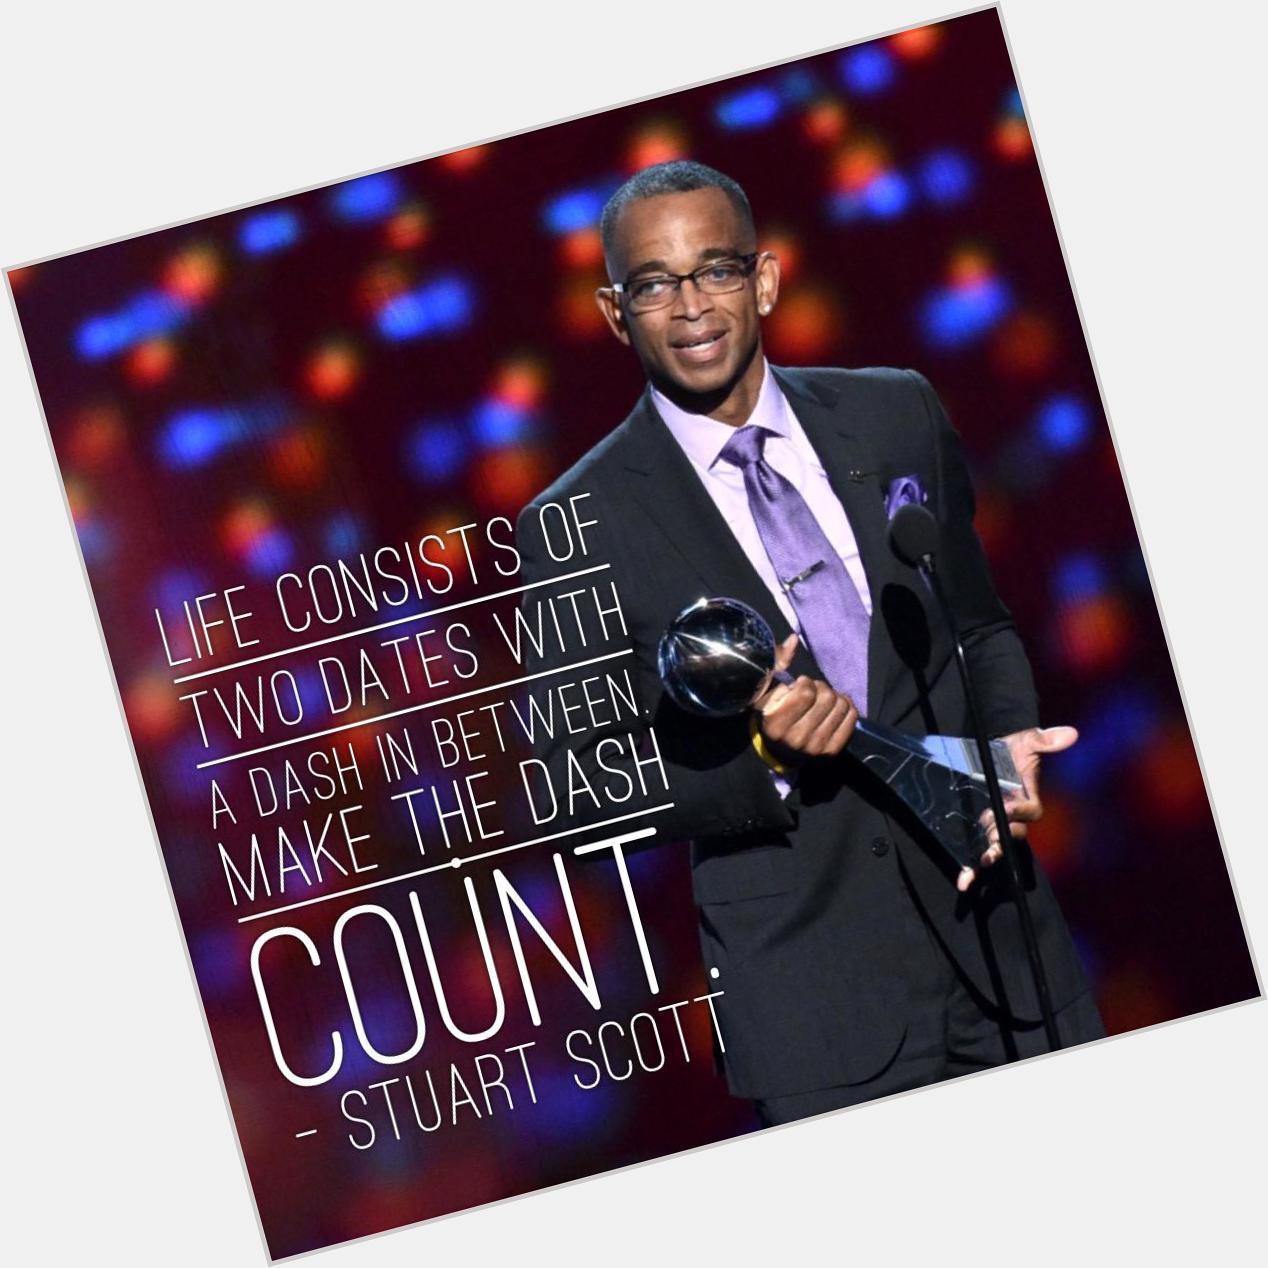 Happy 50th birthday, Stuart Scott. I\m working on what goes in that dash. Thanks for the inspiration. You are missed. 